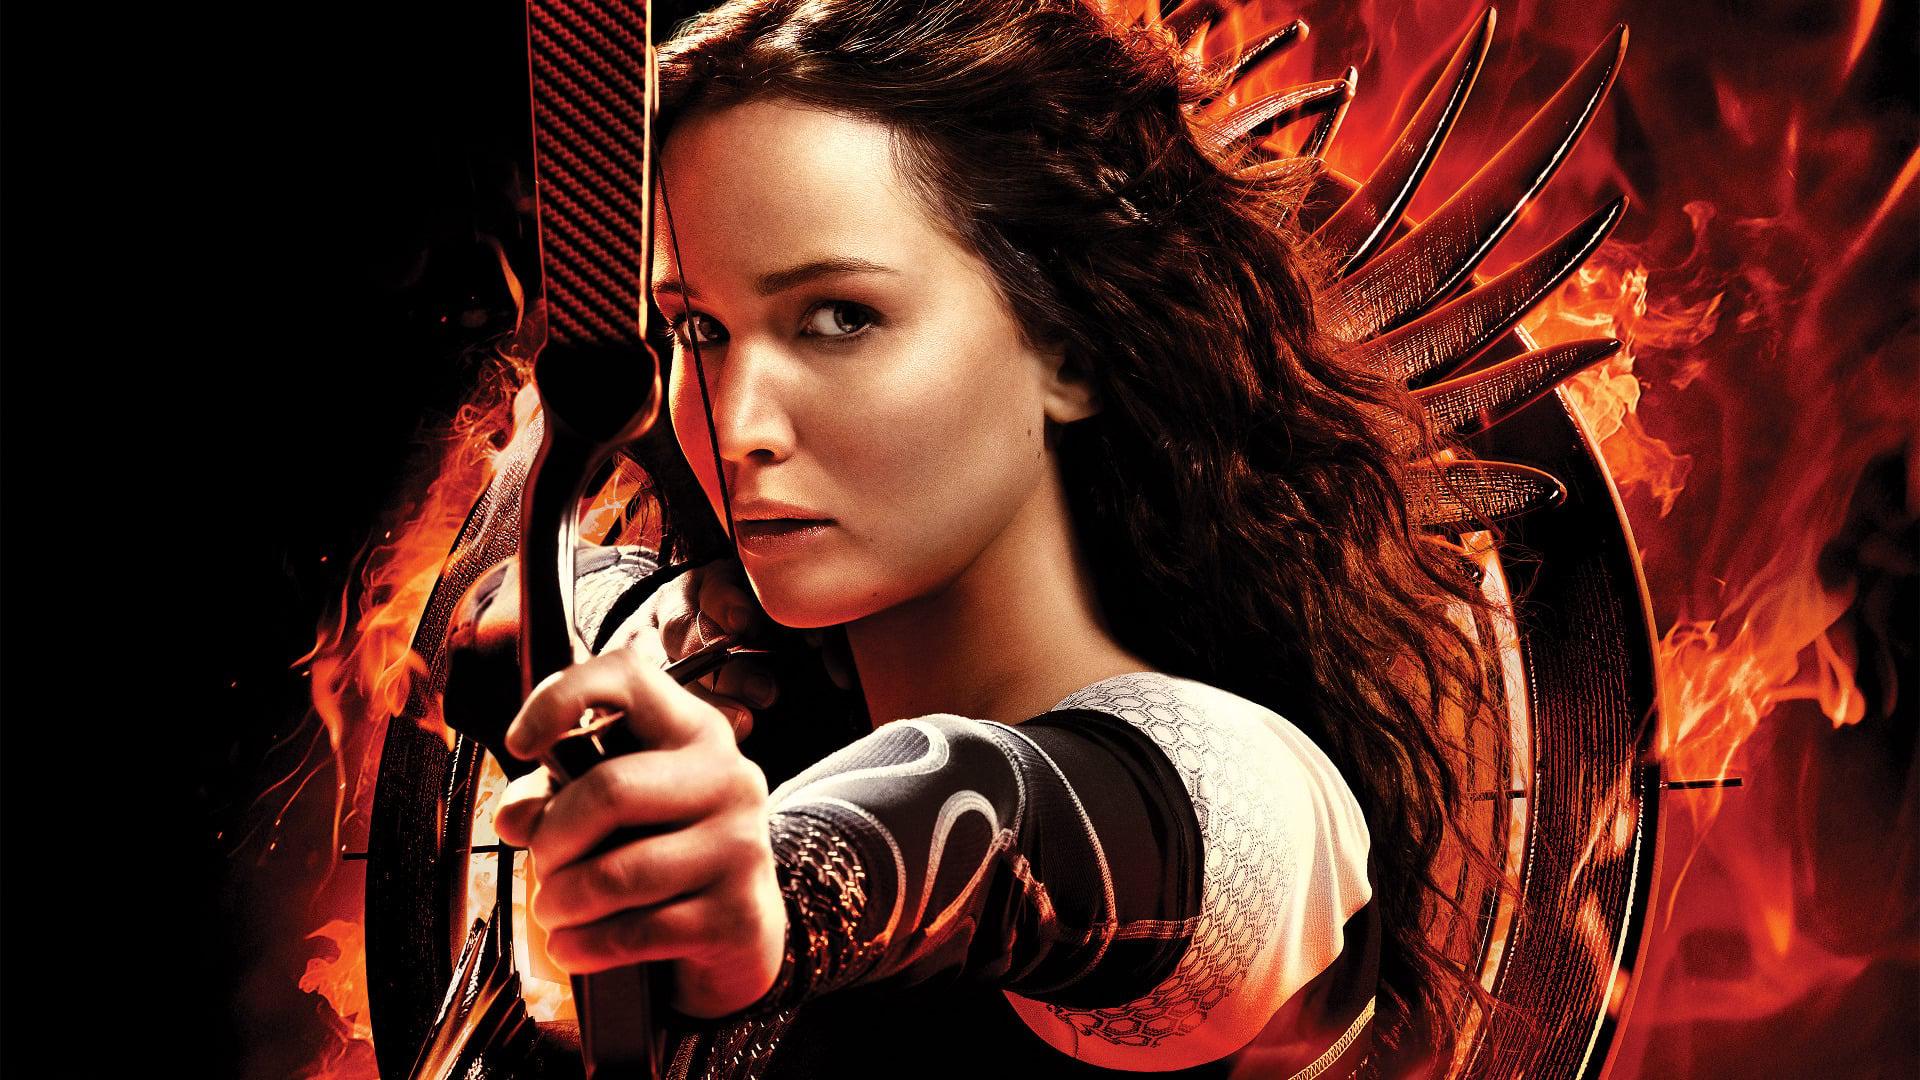 Backdrop Image for The Hunger Games: Catching Fire